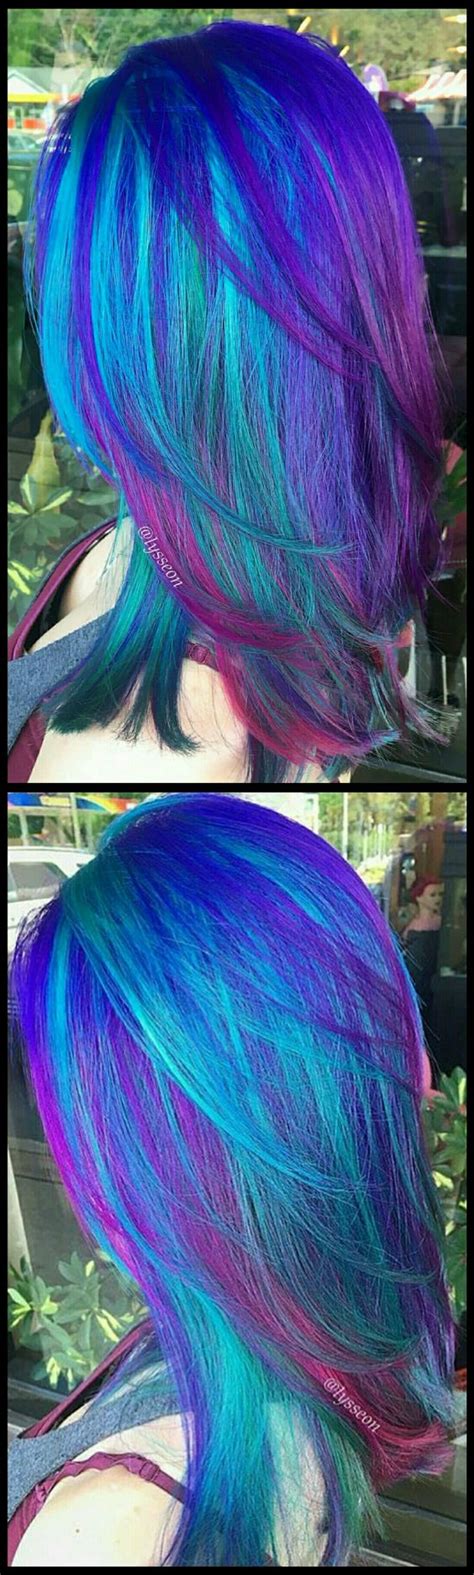 Over the past few years, purple ombre hair has become an amazing way to be creative with your hair color, show your whimsical side, and make a big change that will get you noticed. Electric blue purple dyed hair - Miladies.net